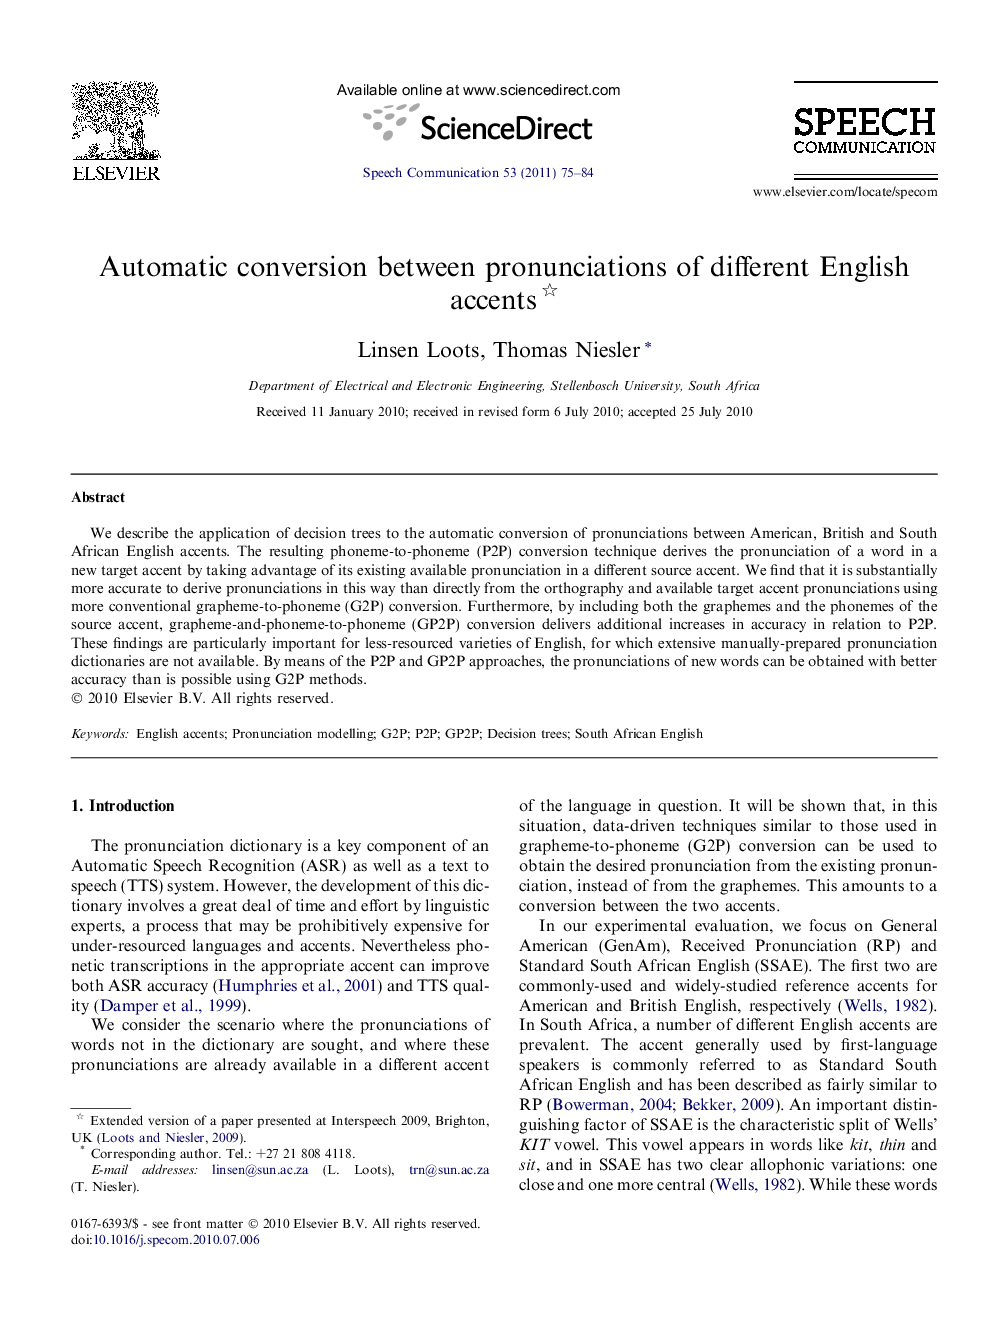 Automatic conversion between pronunciations of different English accents 